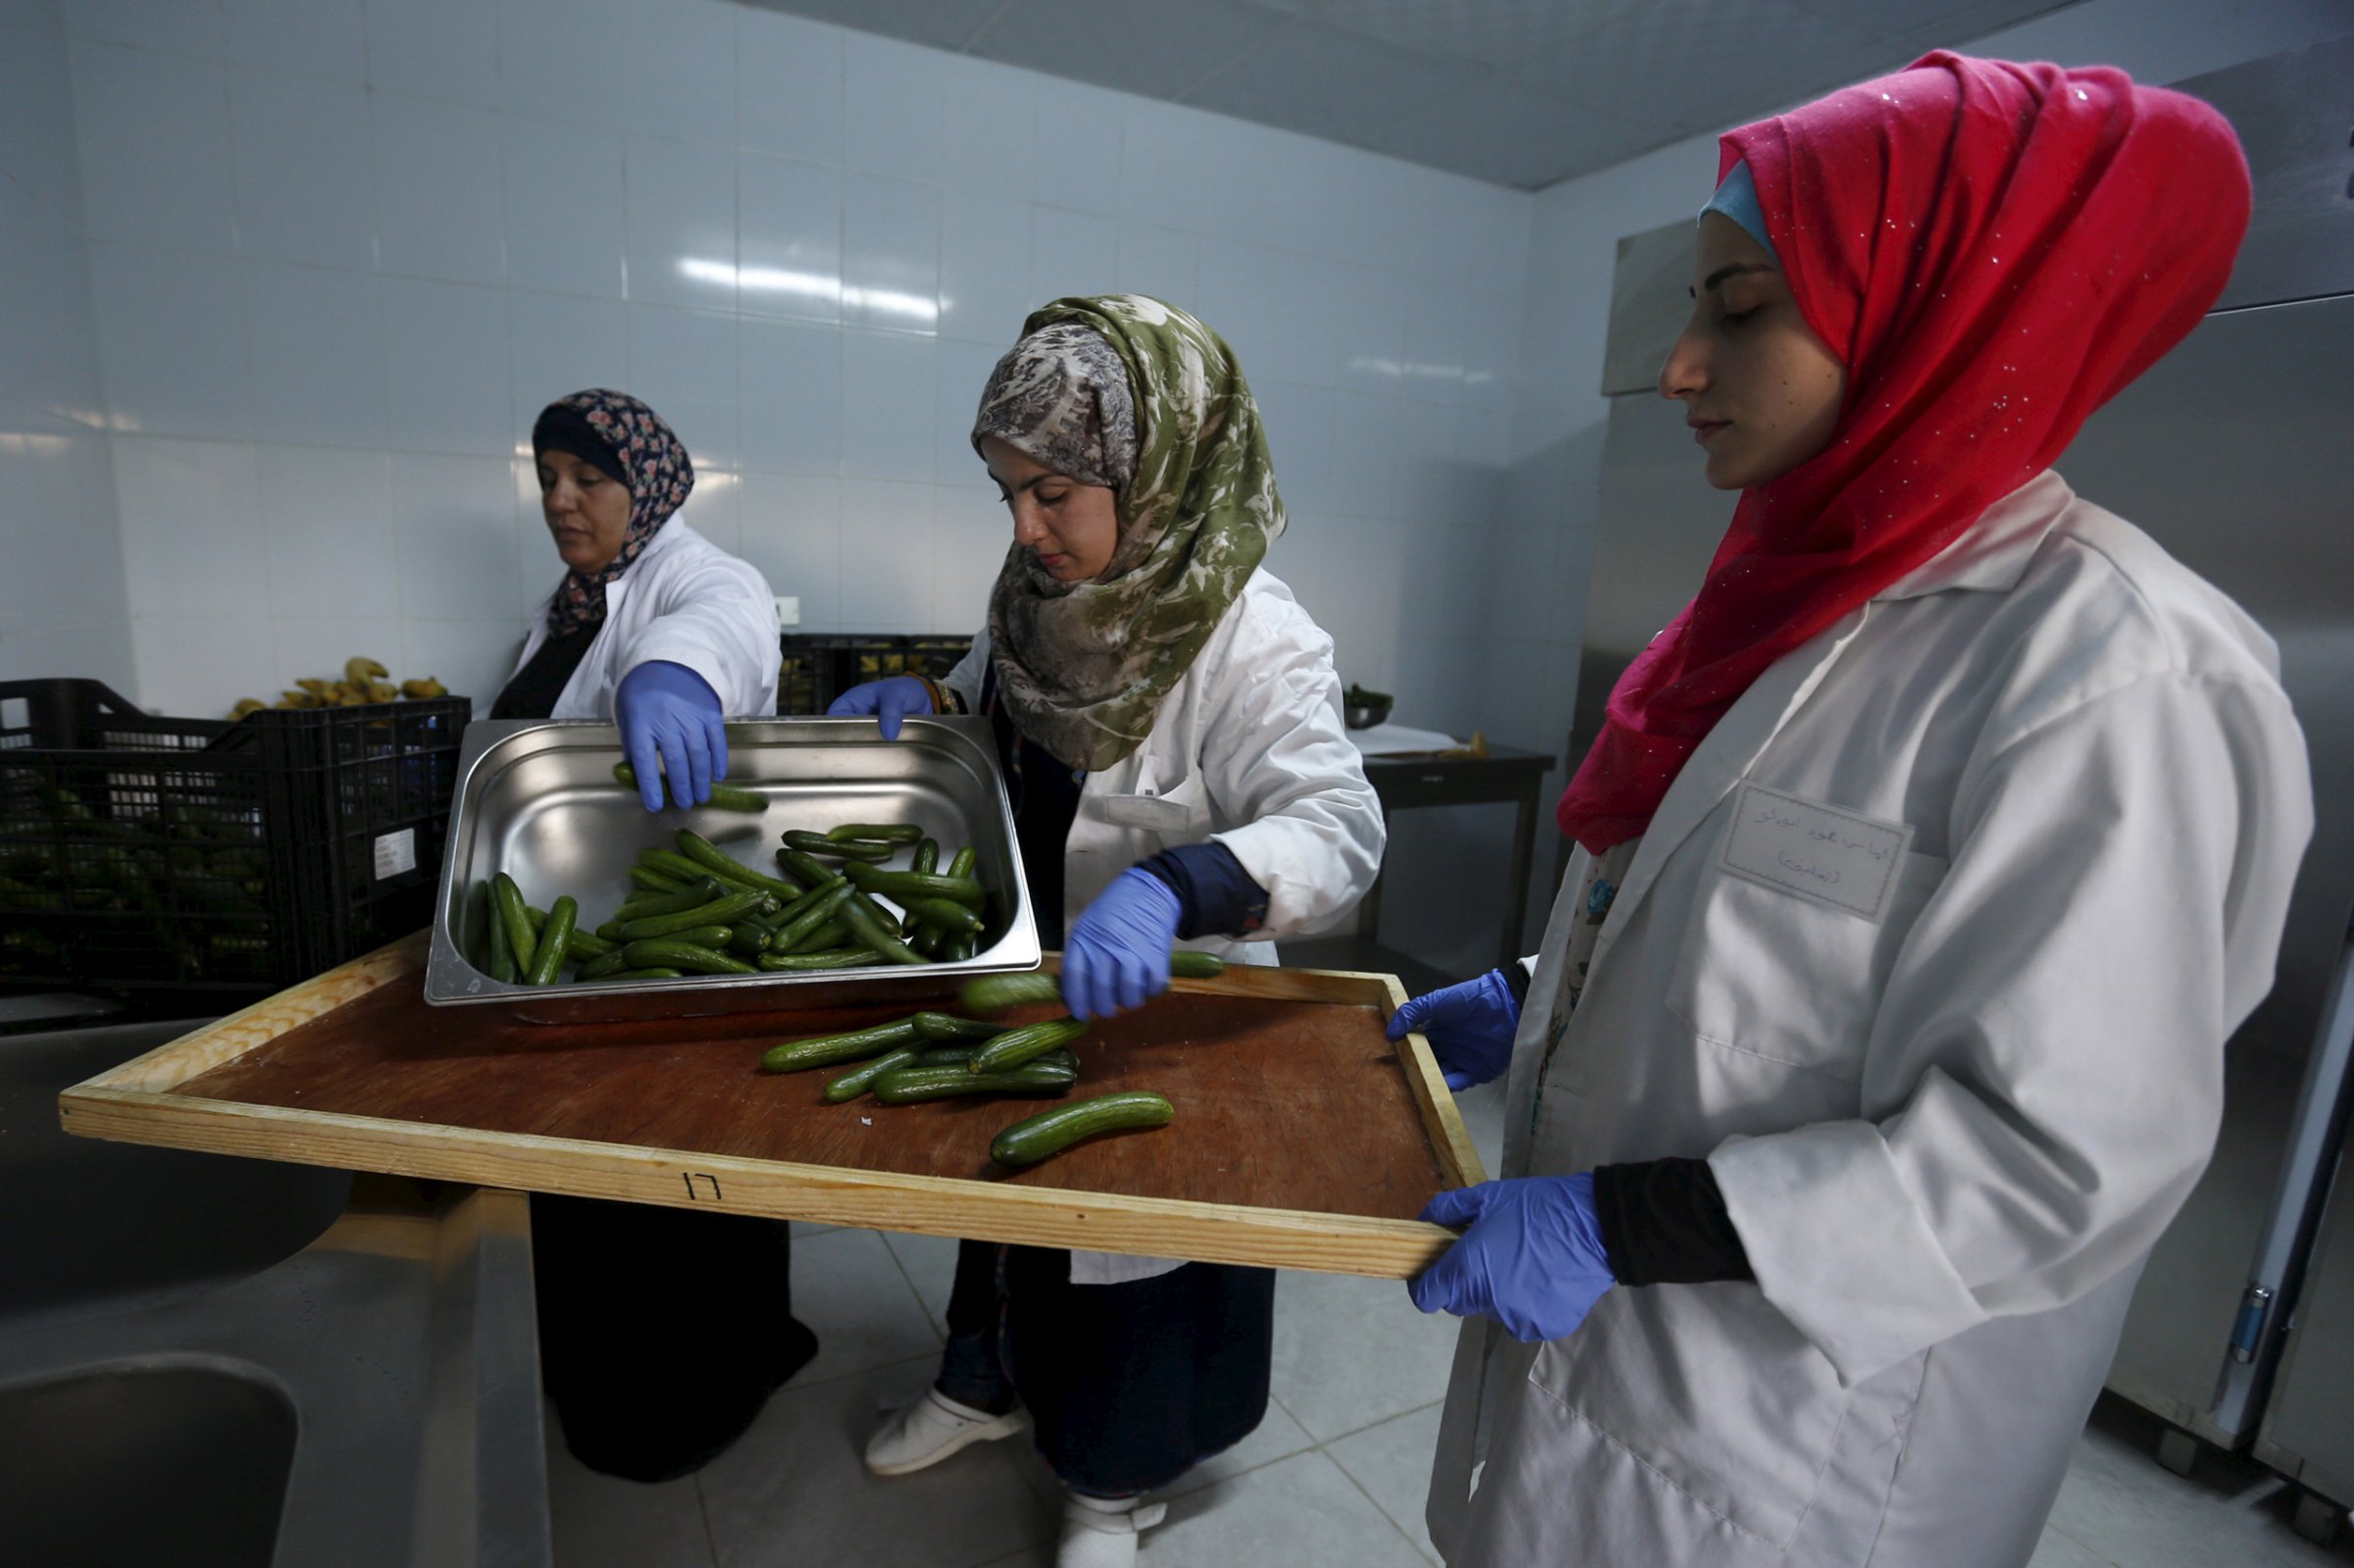 Workers prepare meals for students as part of a World Food Programme (WFP)-run project to provide healthy meals to students and to raise awareness of good eating habits, in the city of Irbid, Jordan, April 26, 2016. REUTERS/ Muhammad Hamed - RTX2BQN2